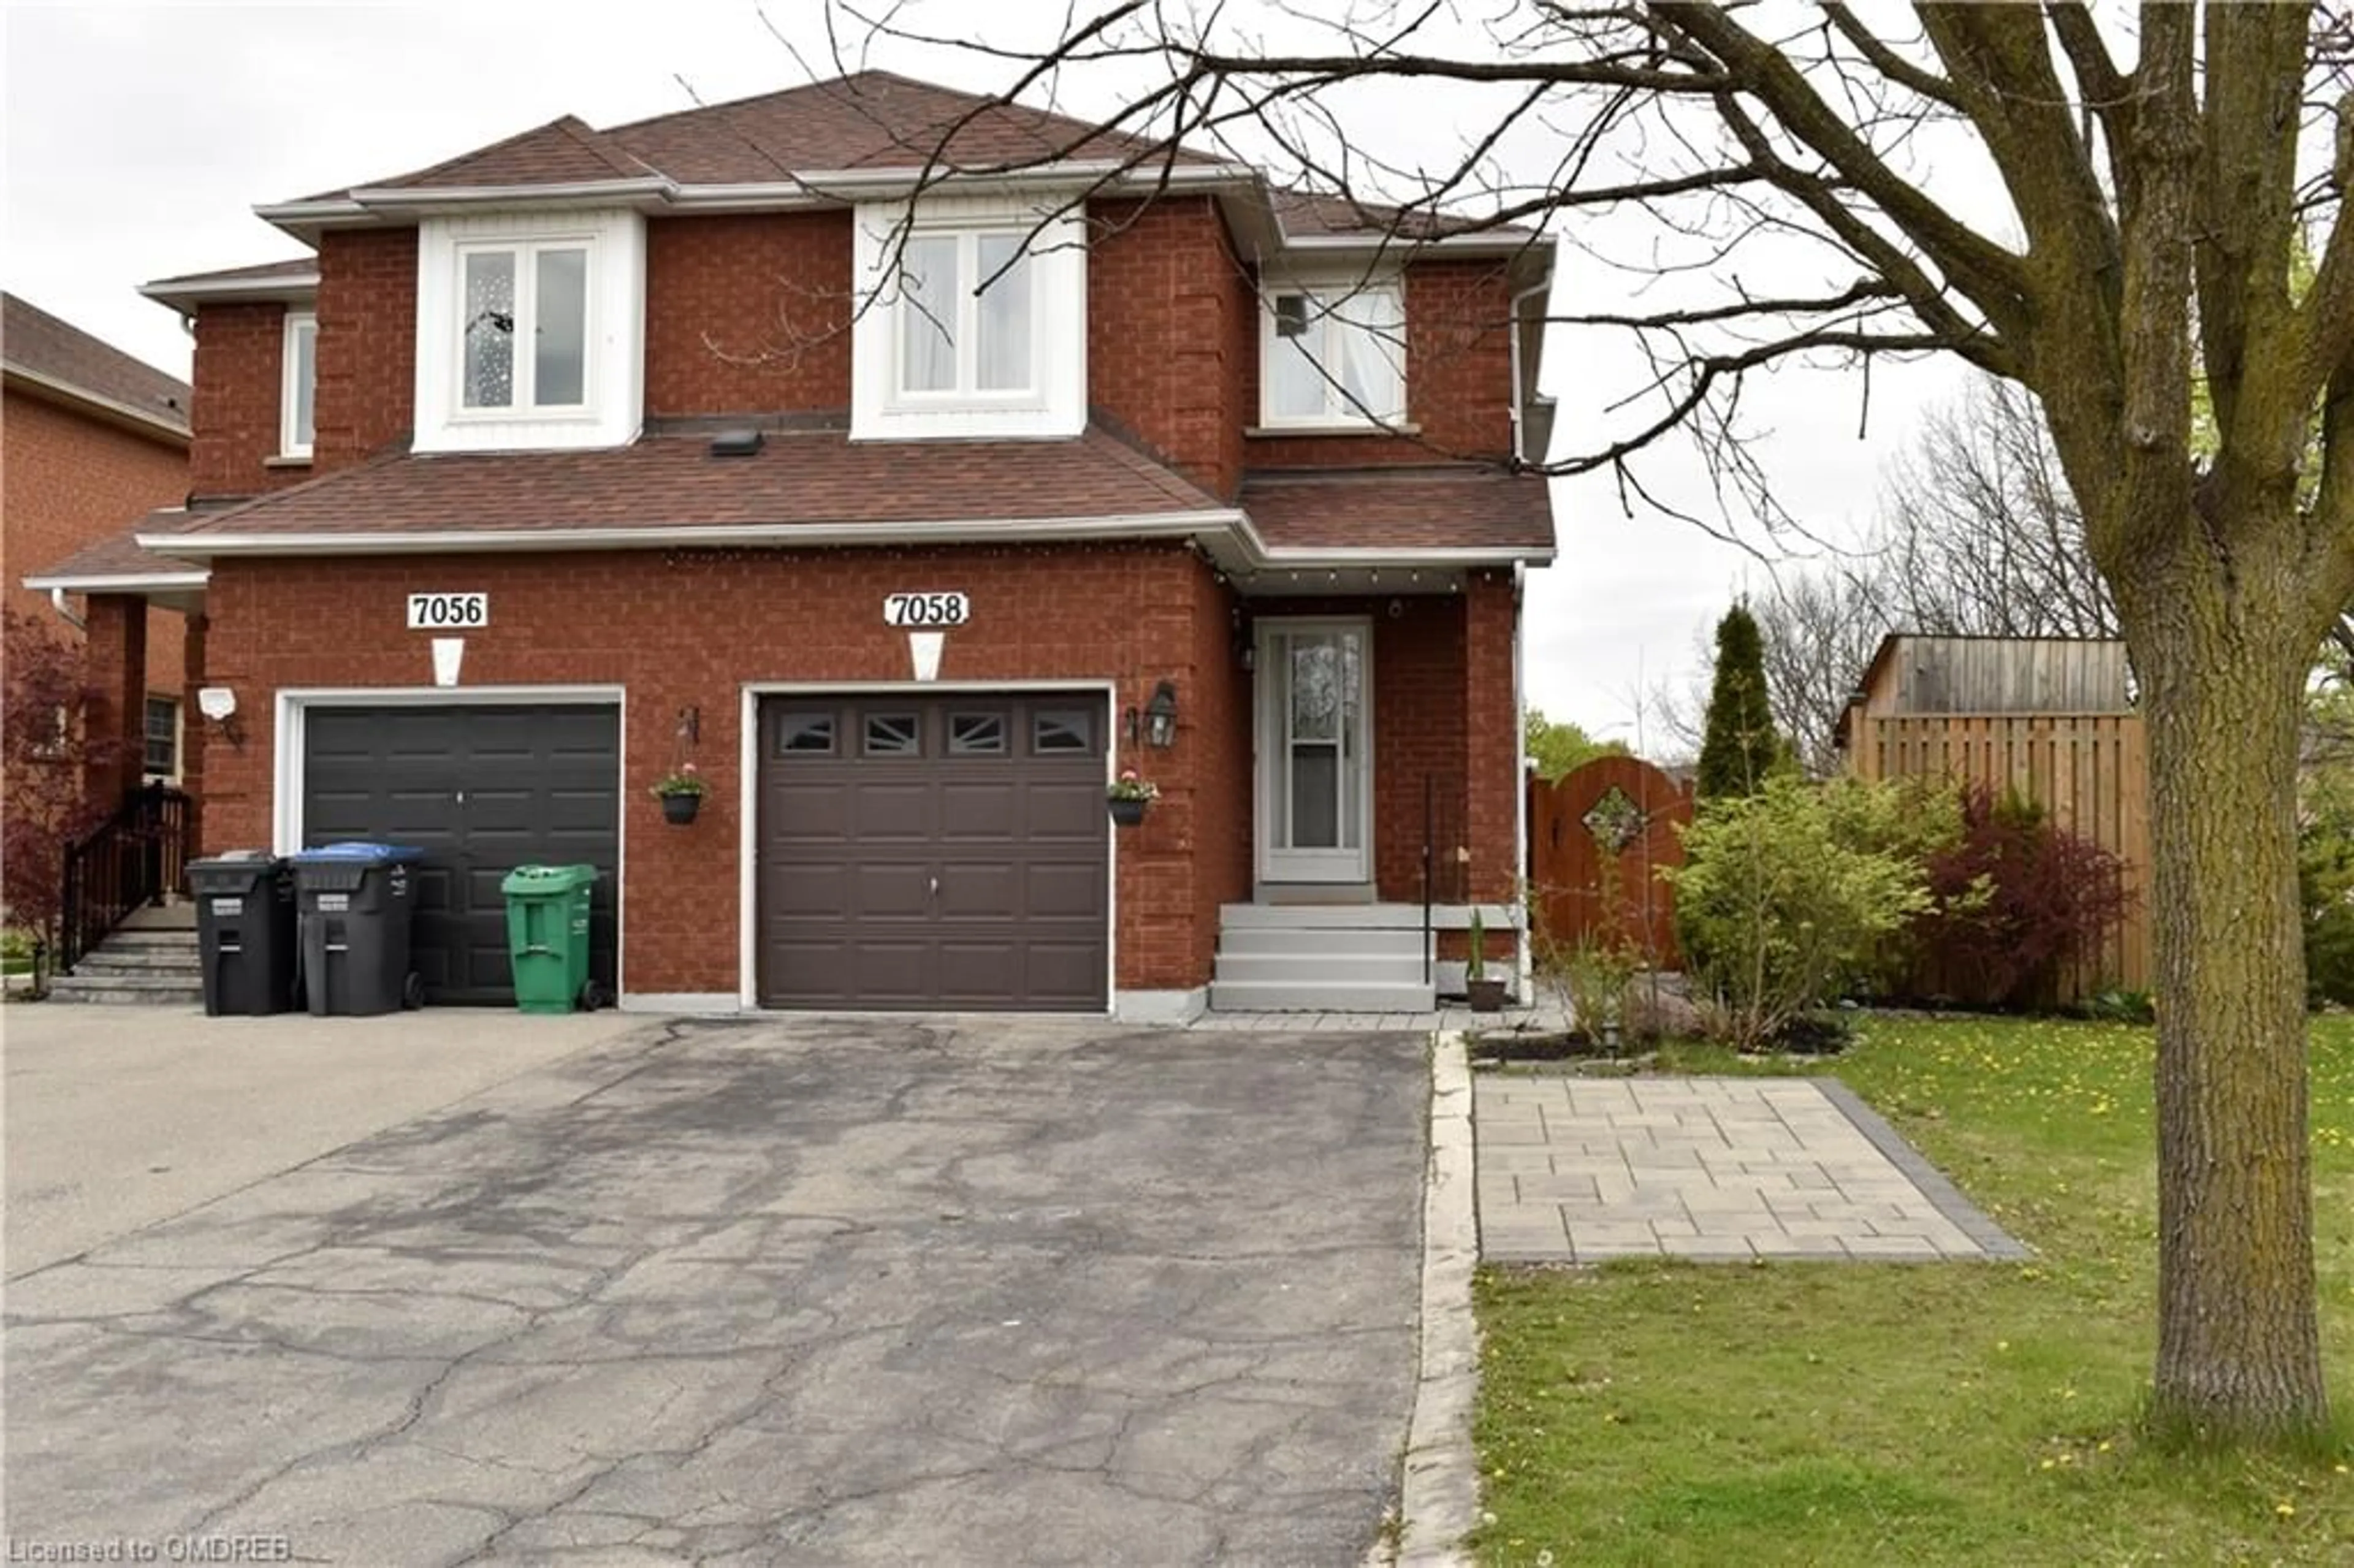 Home with brick exterior material for 7058 Stoneywood Way, Mississauga Ontario L5N 6Y5